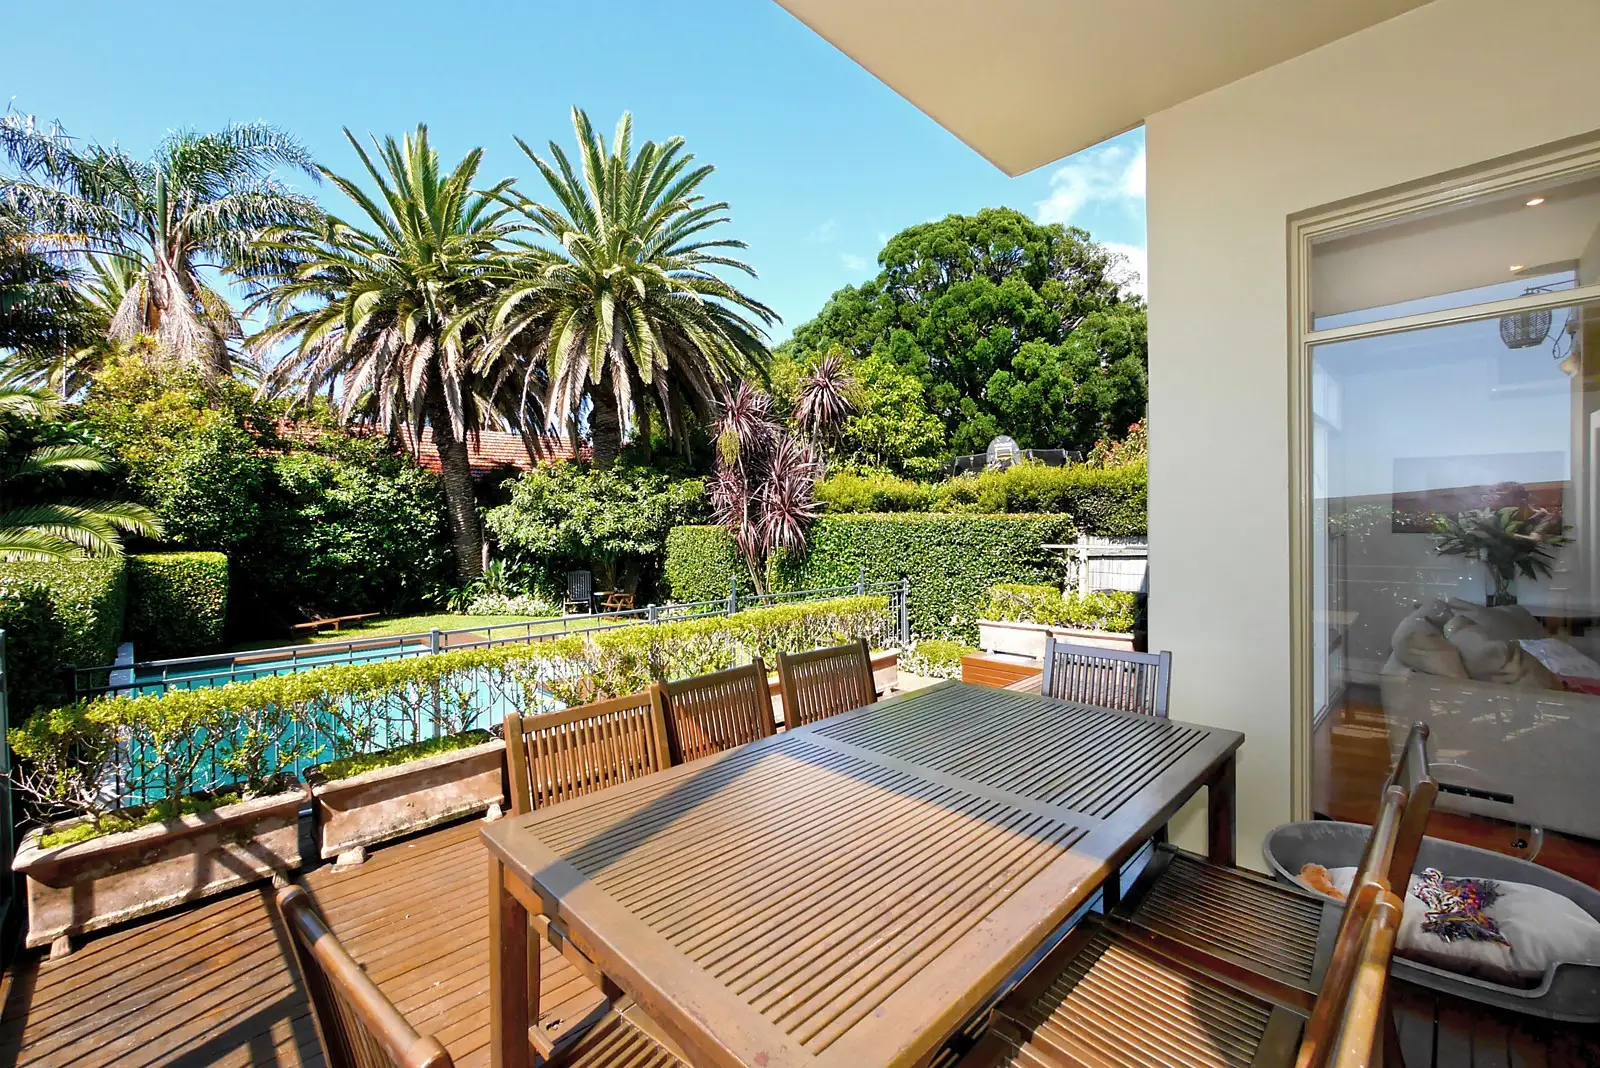 Photo #2: 9 Clarendon Street, Vaucluse - Sold by Sydney Sotheby's International Realty